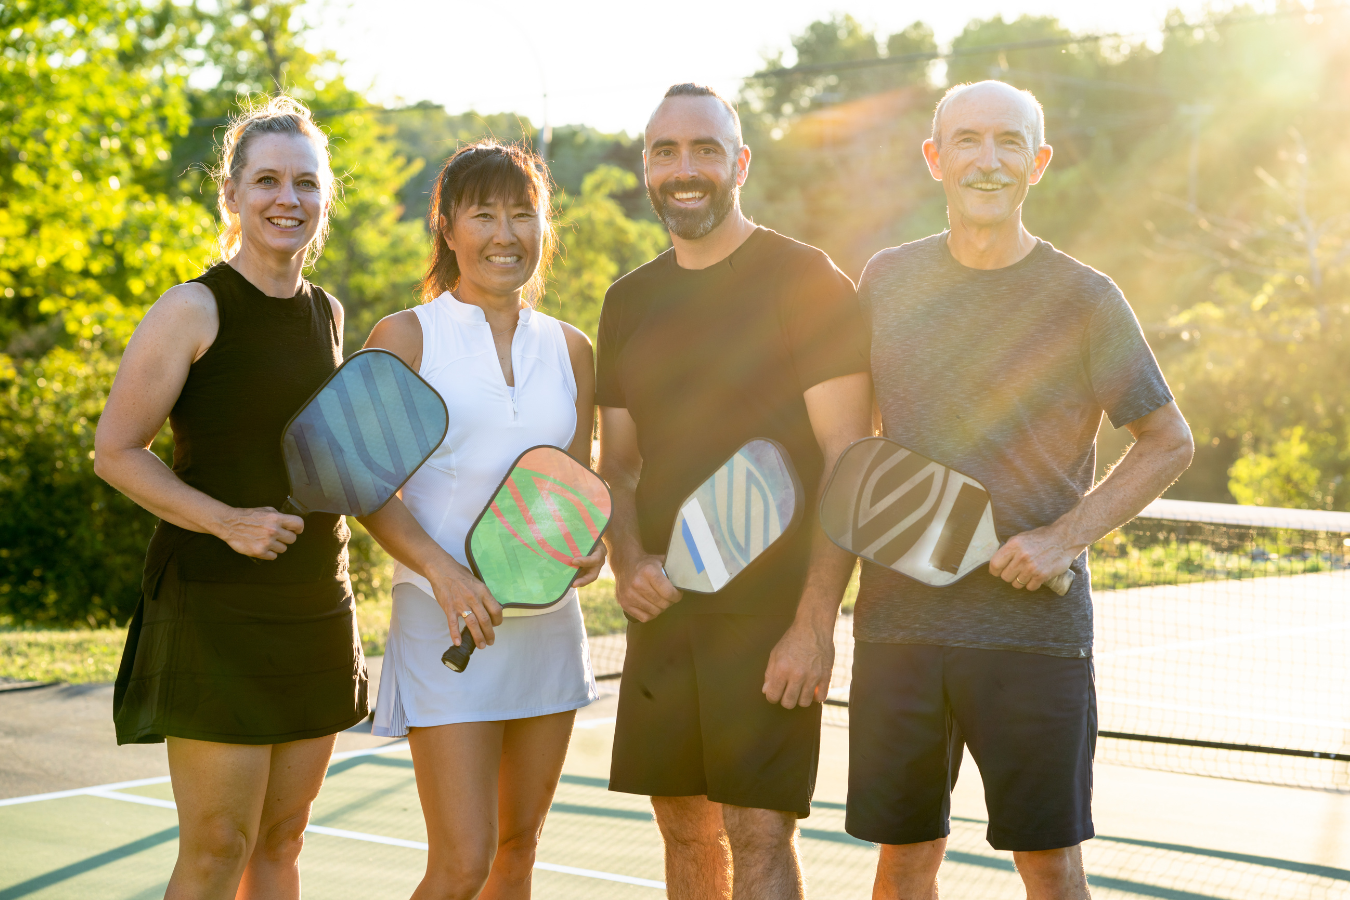 Two adult women and two adult men stand together for a picture before their pickleball game. In the article, it is mentioned that Pickleball Canada needed to work to streamline their policies, which could be assisted by an ERP like Sparkrock 365.